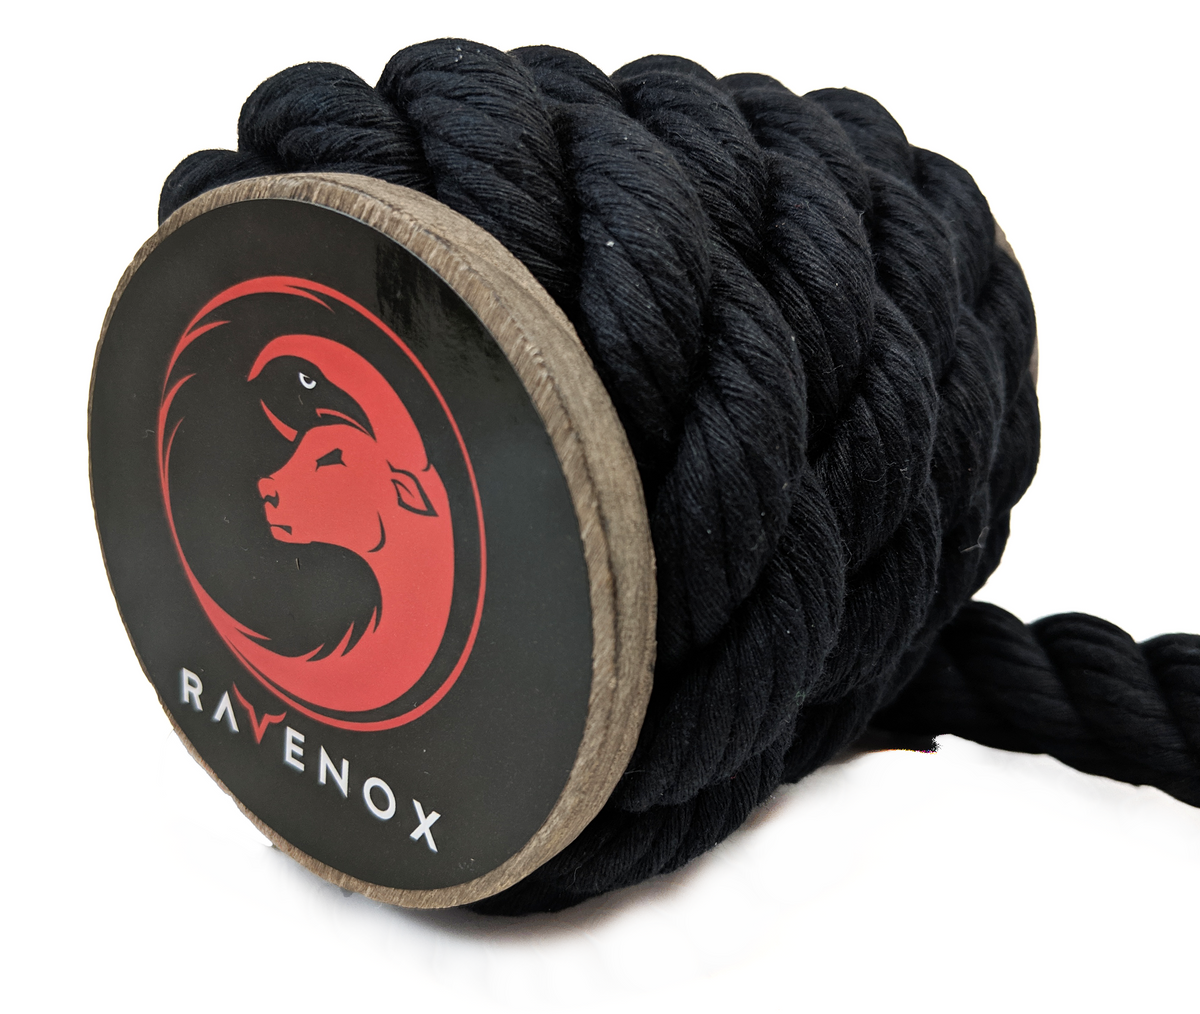 10mm Black Braided Rope 30ft, Thick Cotton Rope, Knotting Cord